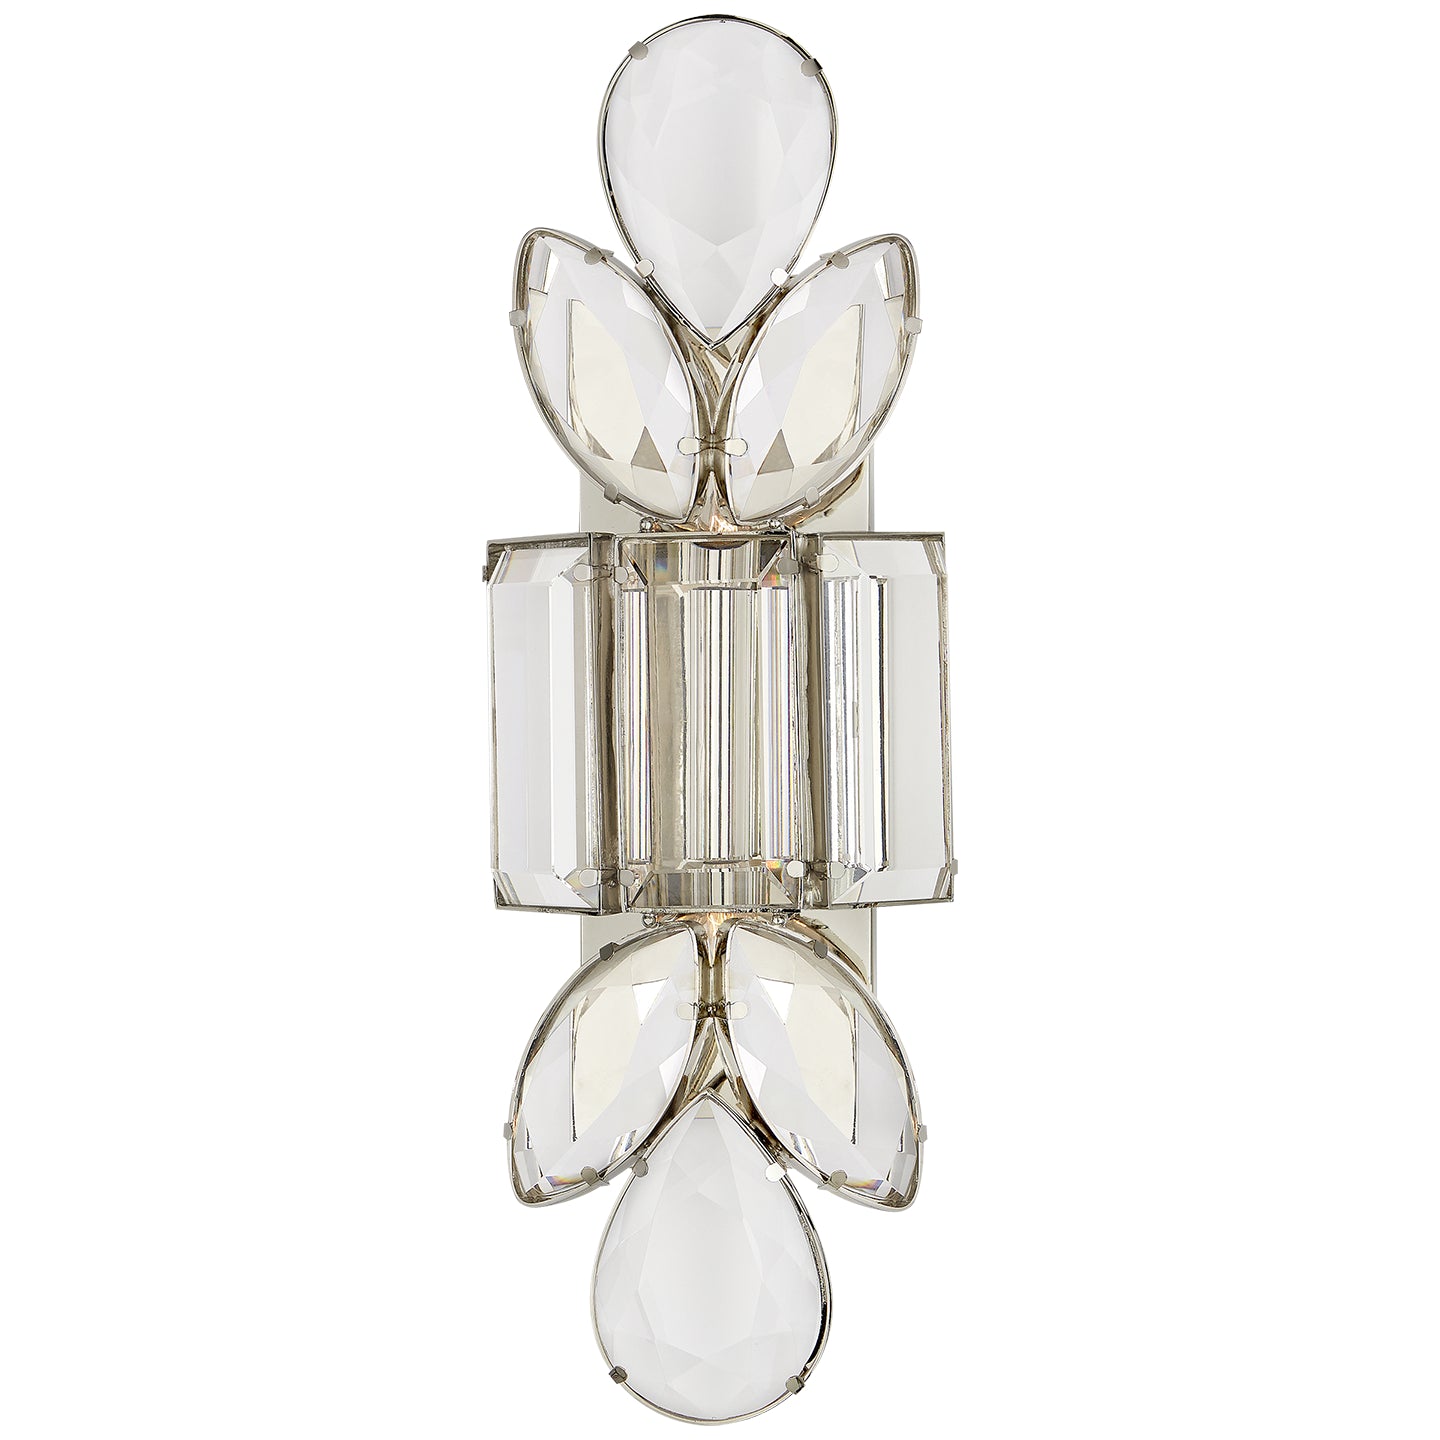 Load image into Gallery viewer, Visual Comfort Signature - KS 2017PN-CG - Two Light Wall Sconce - Lloyd - Polished Nickel
